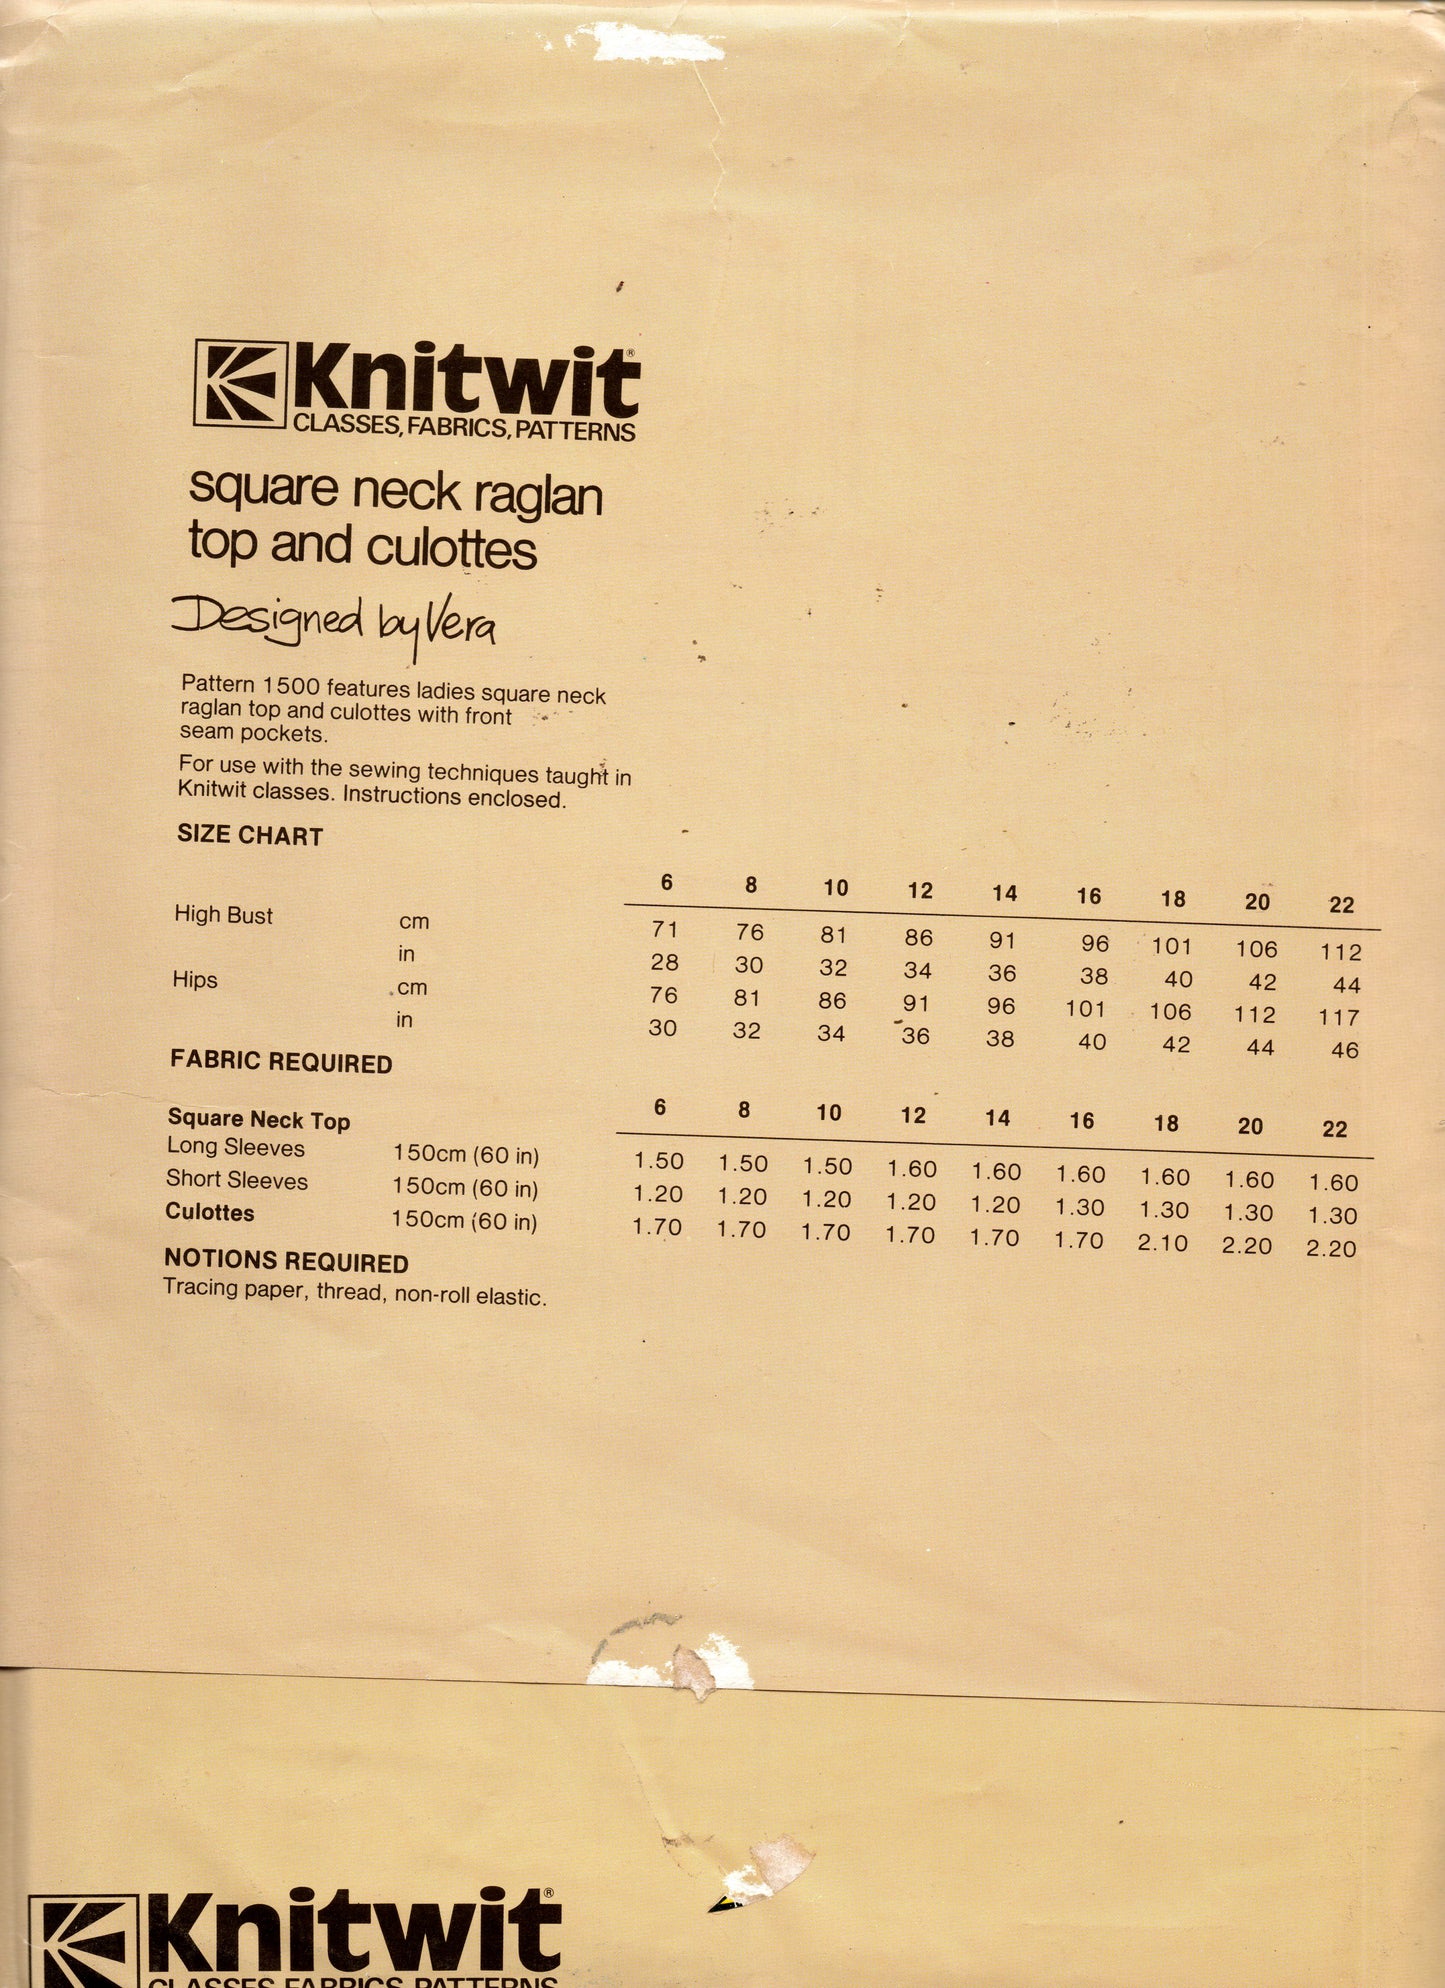 Knitwit 1500 Womens Stretch Knit Culottes & Raglan Sleeved Top 1980s Vintage Sewing Pattern Sizes 6 - 22 UNCUT Factory Folded